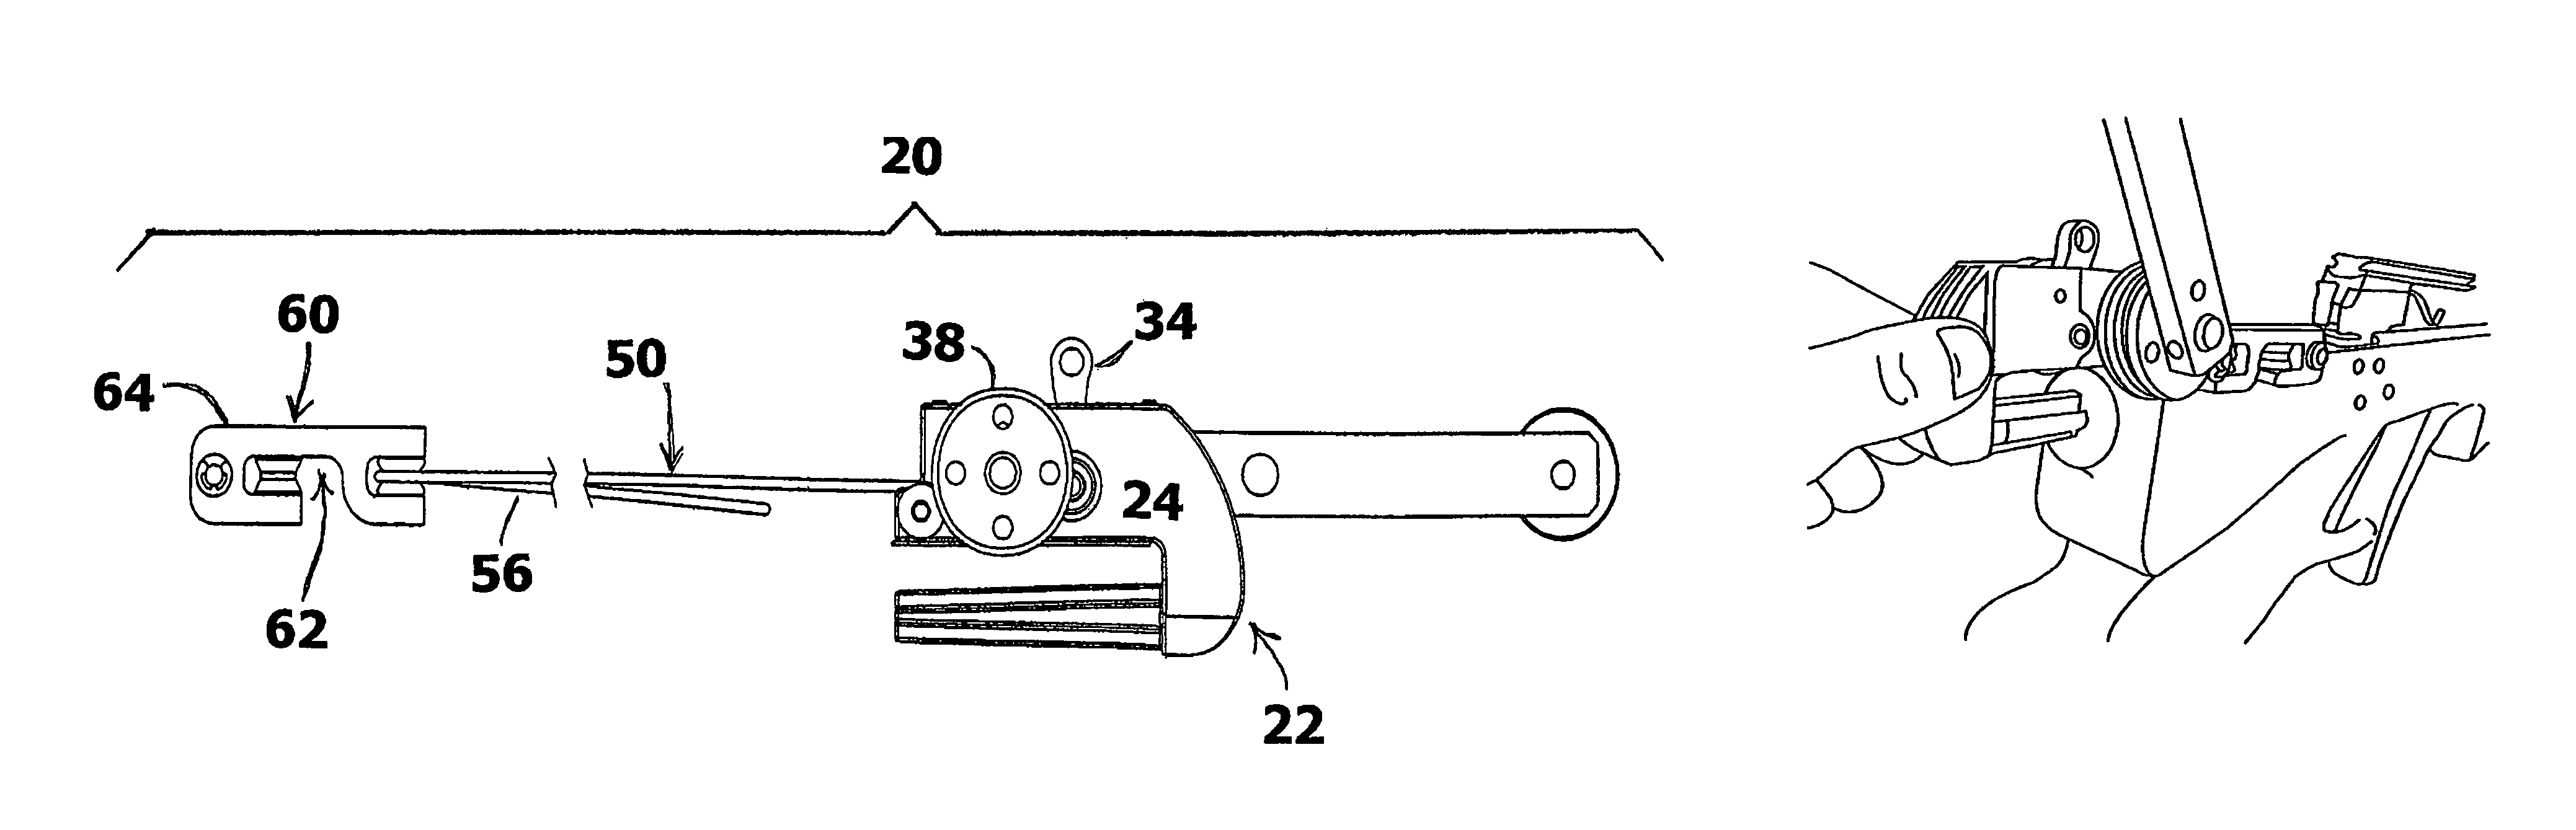 Cocking winch apparatus for a crossbow, crossbow system including the cocking winch apparatus, and method of using same